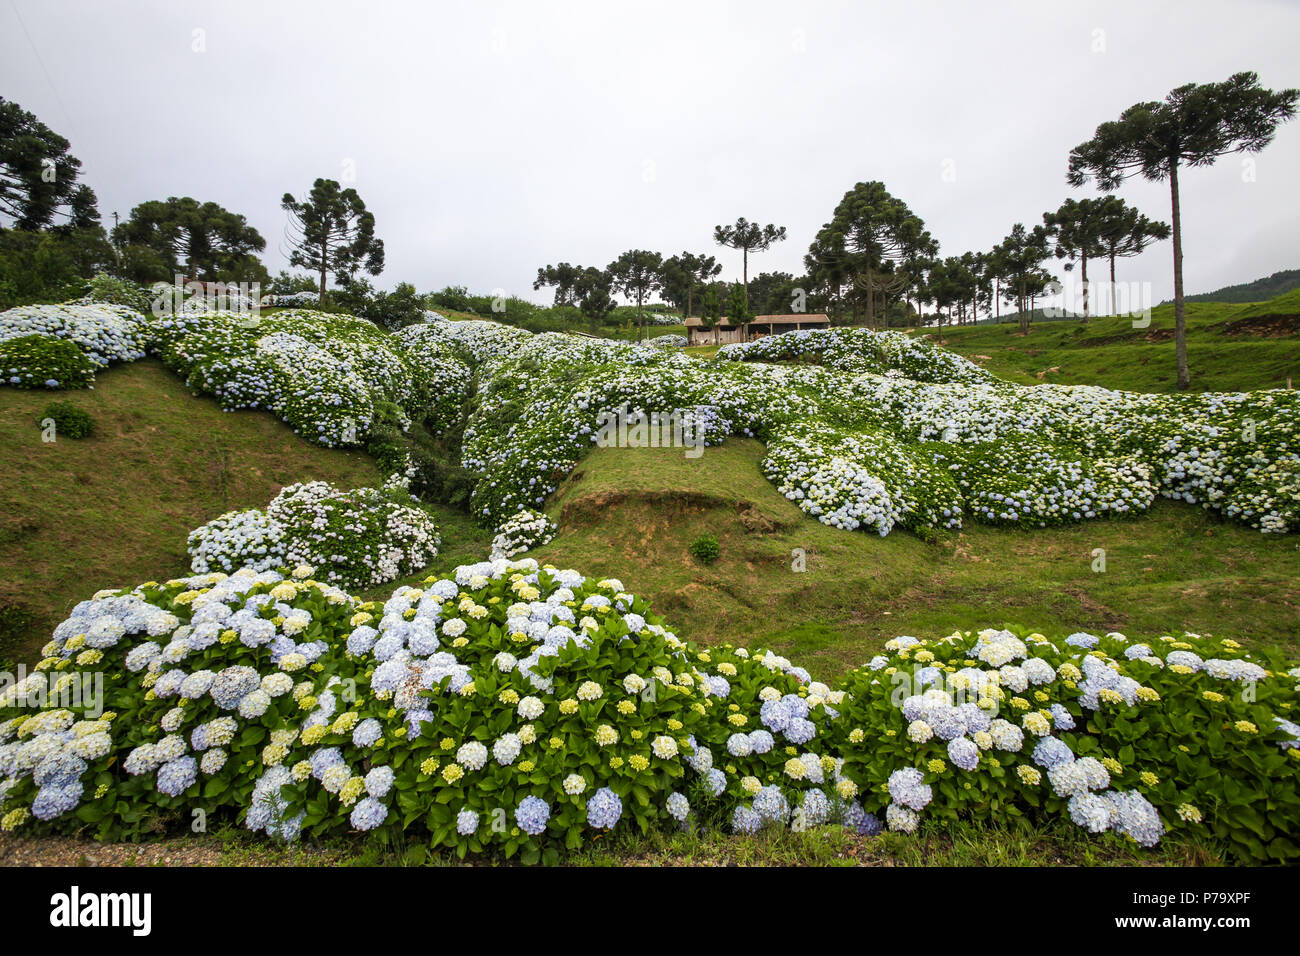 Santa Catarina, Brazil. View of a beautiful landscape grassy mountain with hydrangeas flowers and trees in winter. Stock Photo